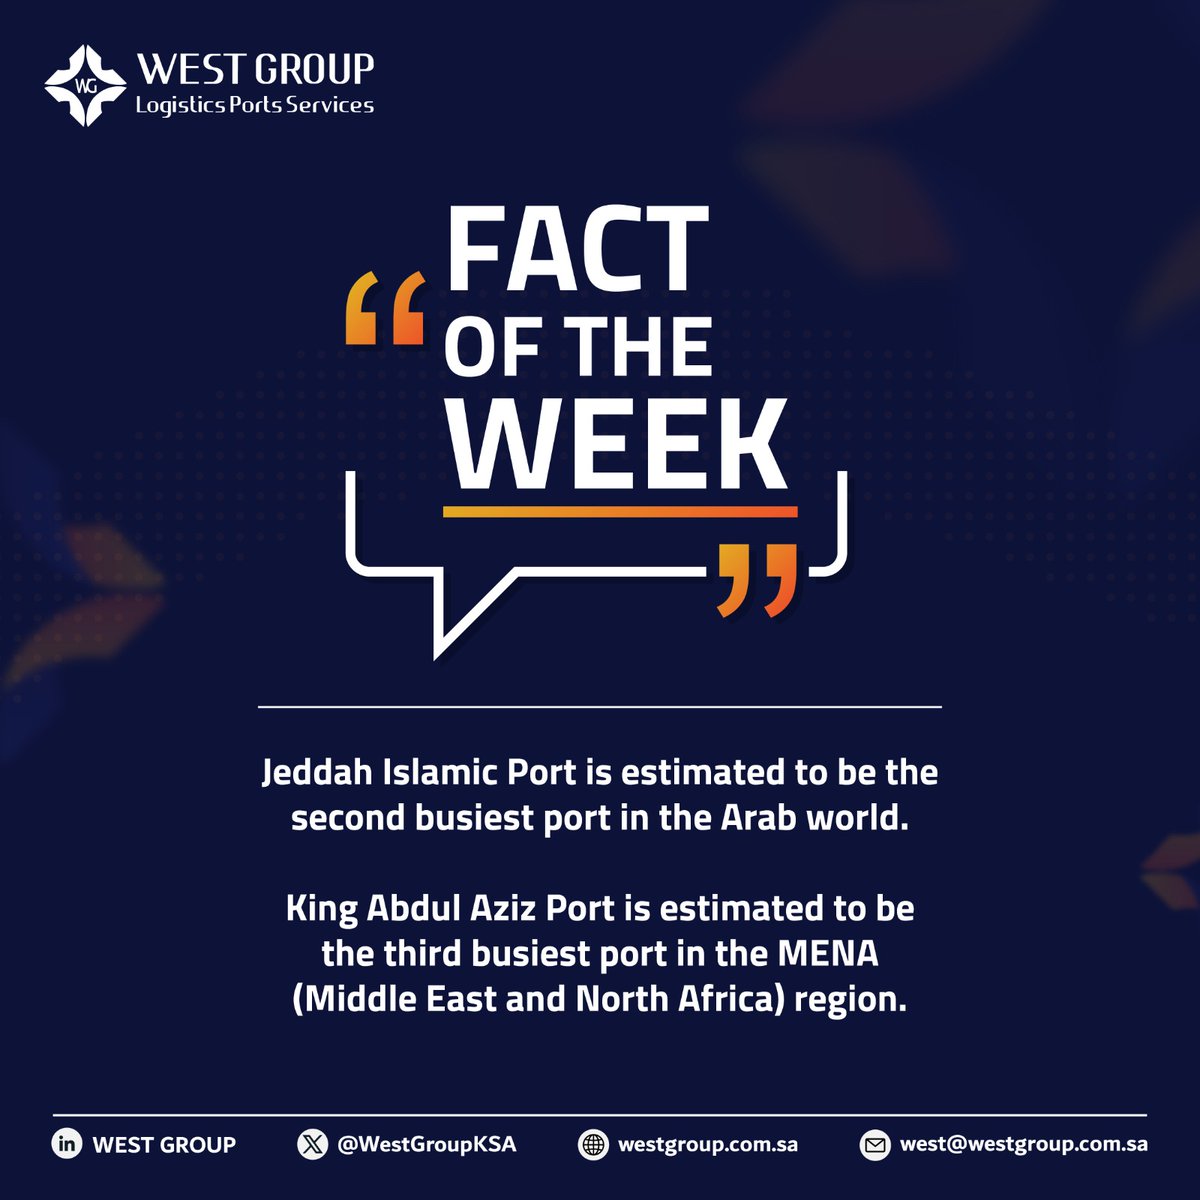 Stay informed with our #FactOfTheWeek!